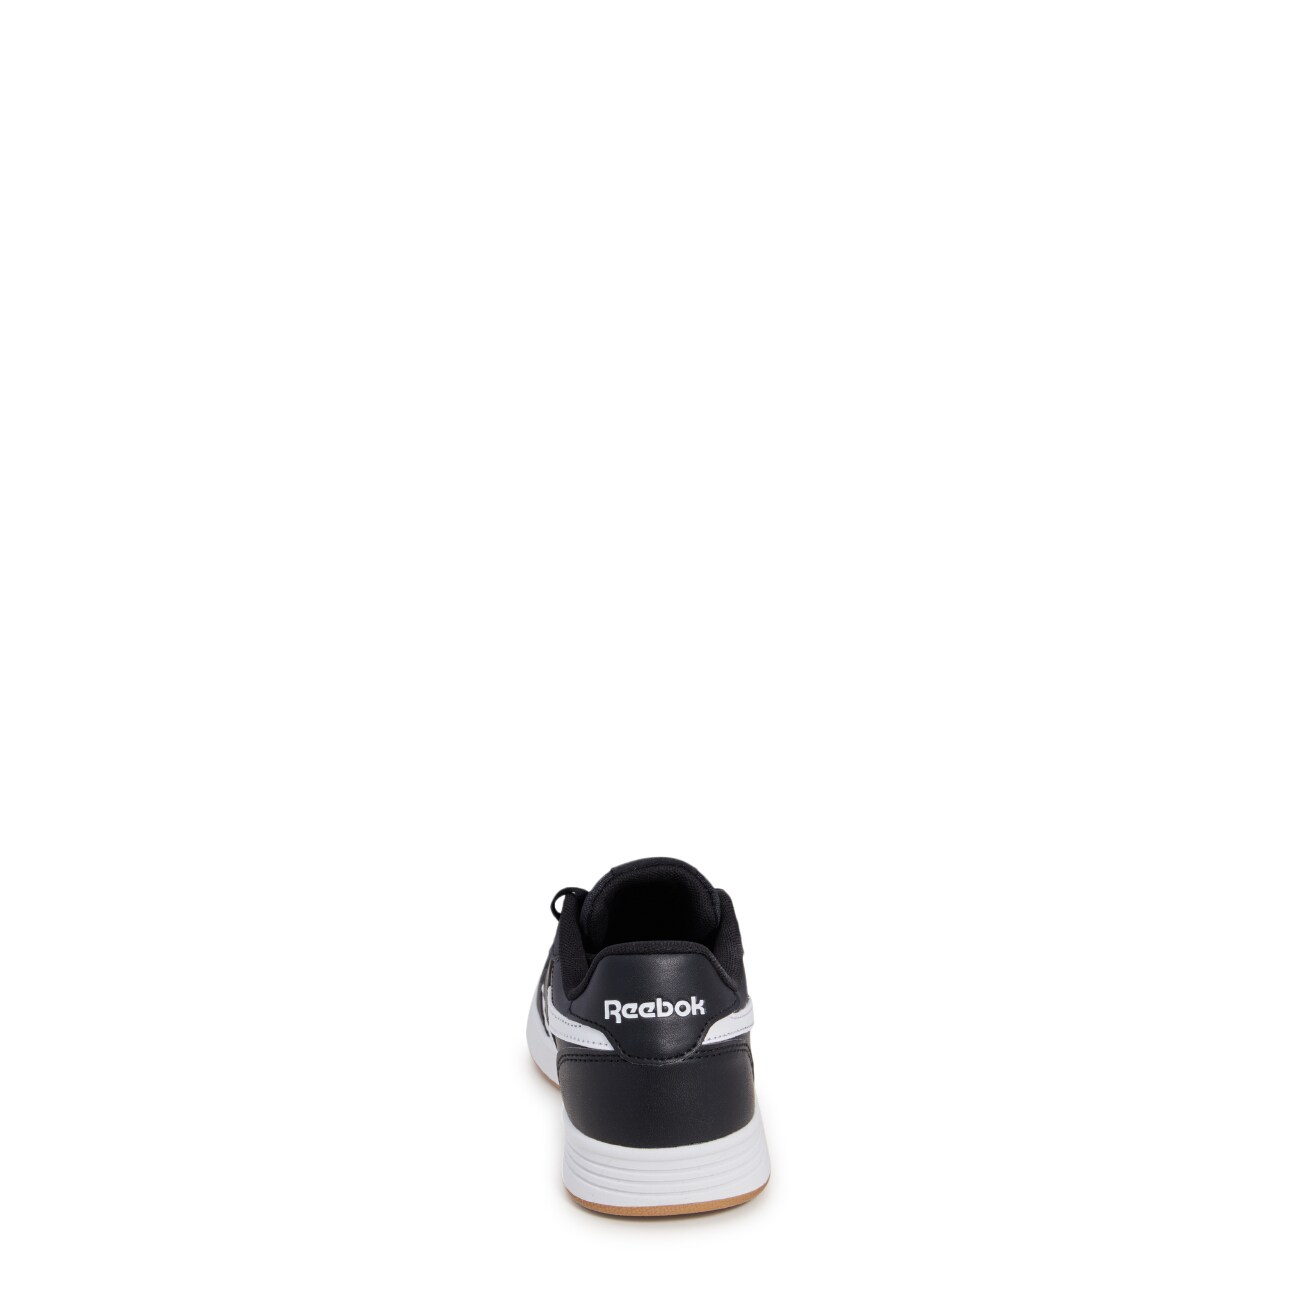 Youth Boys' Court Advance Sneaker